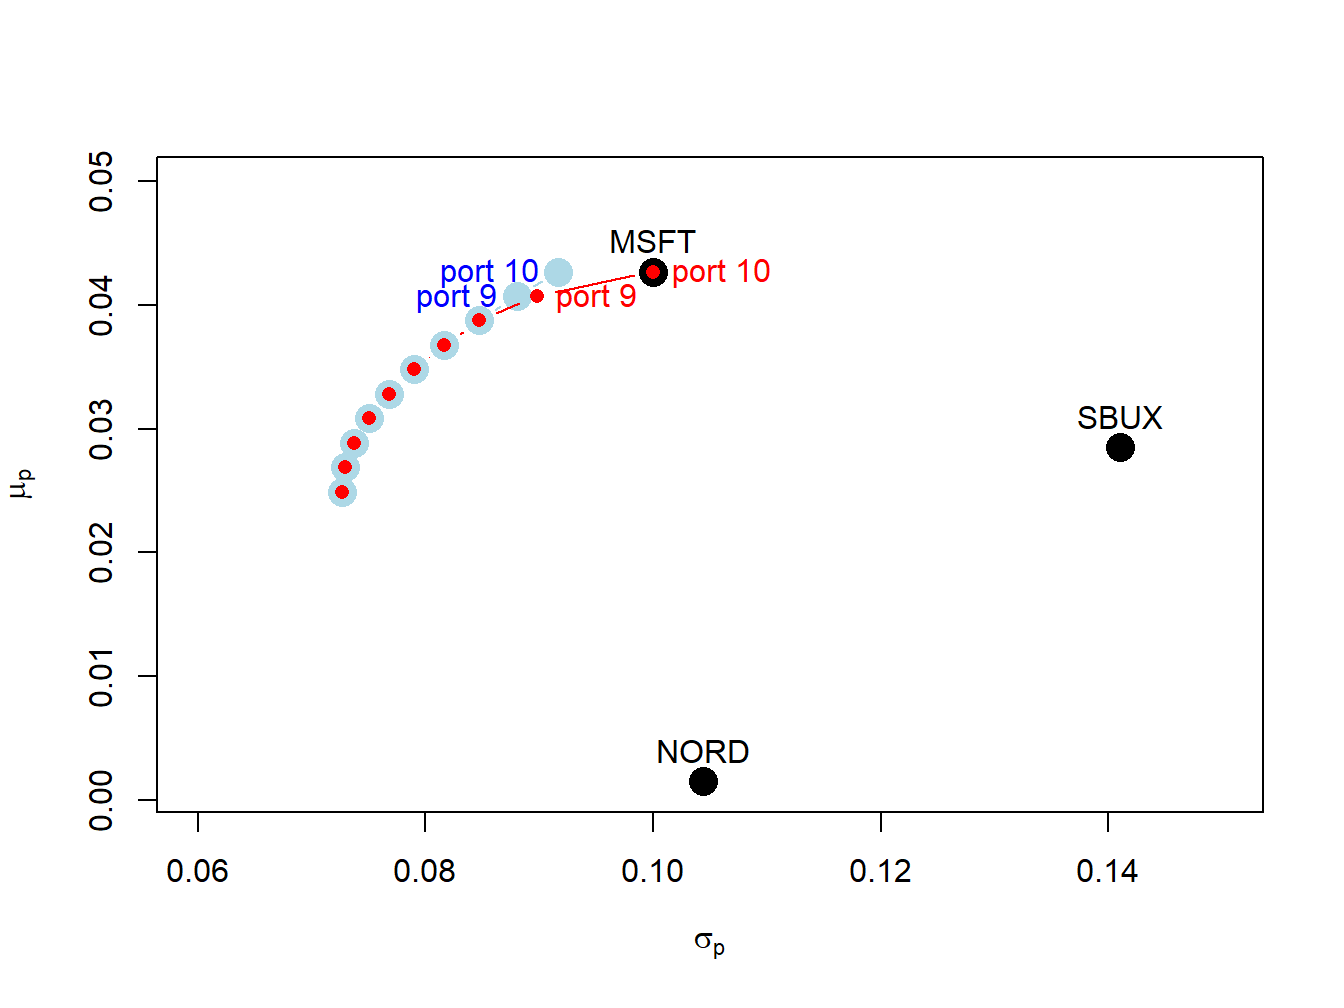 Efficient frontier portfolios with and without short sales. The unconstrained efficient frontier portfolios are in blue, and the short sales constrained efficient portfolios are in red. The unconstrained portfolios labeled "port 9" and "port 10" have short sales in Nordstrom. The constrained portfolio labeled "port 9" has zero weight in Nordstrom, and the constrained portfolio labeled "port 10align has zero weights in Nordstrom and Starbucks. 